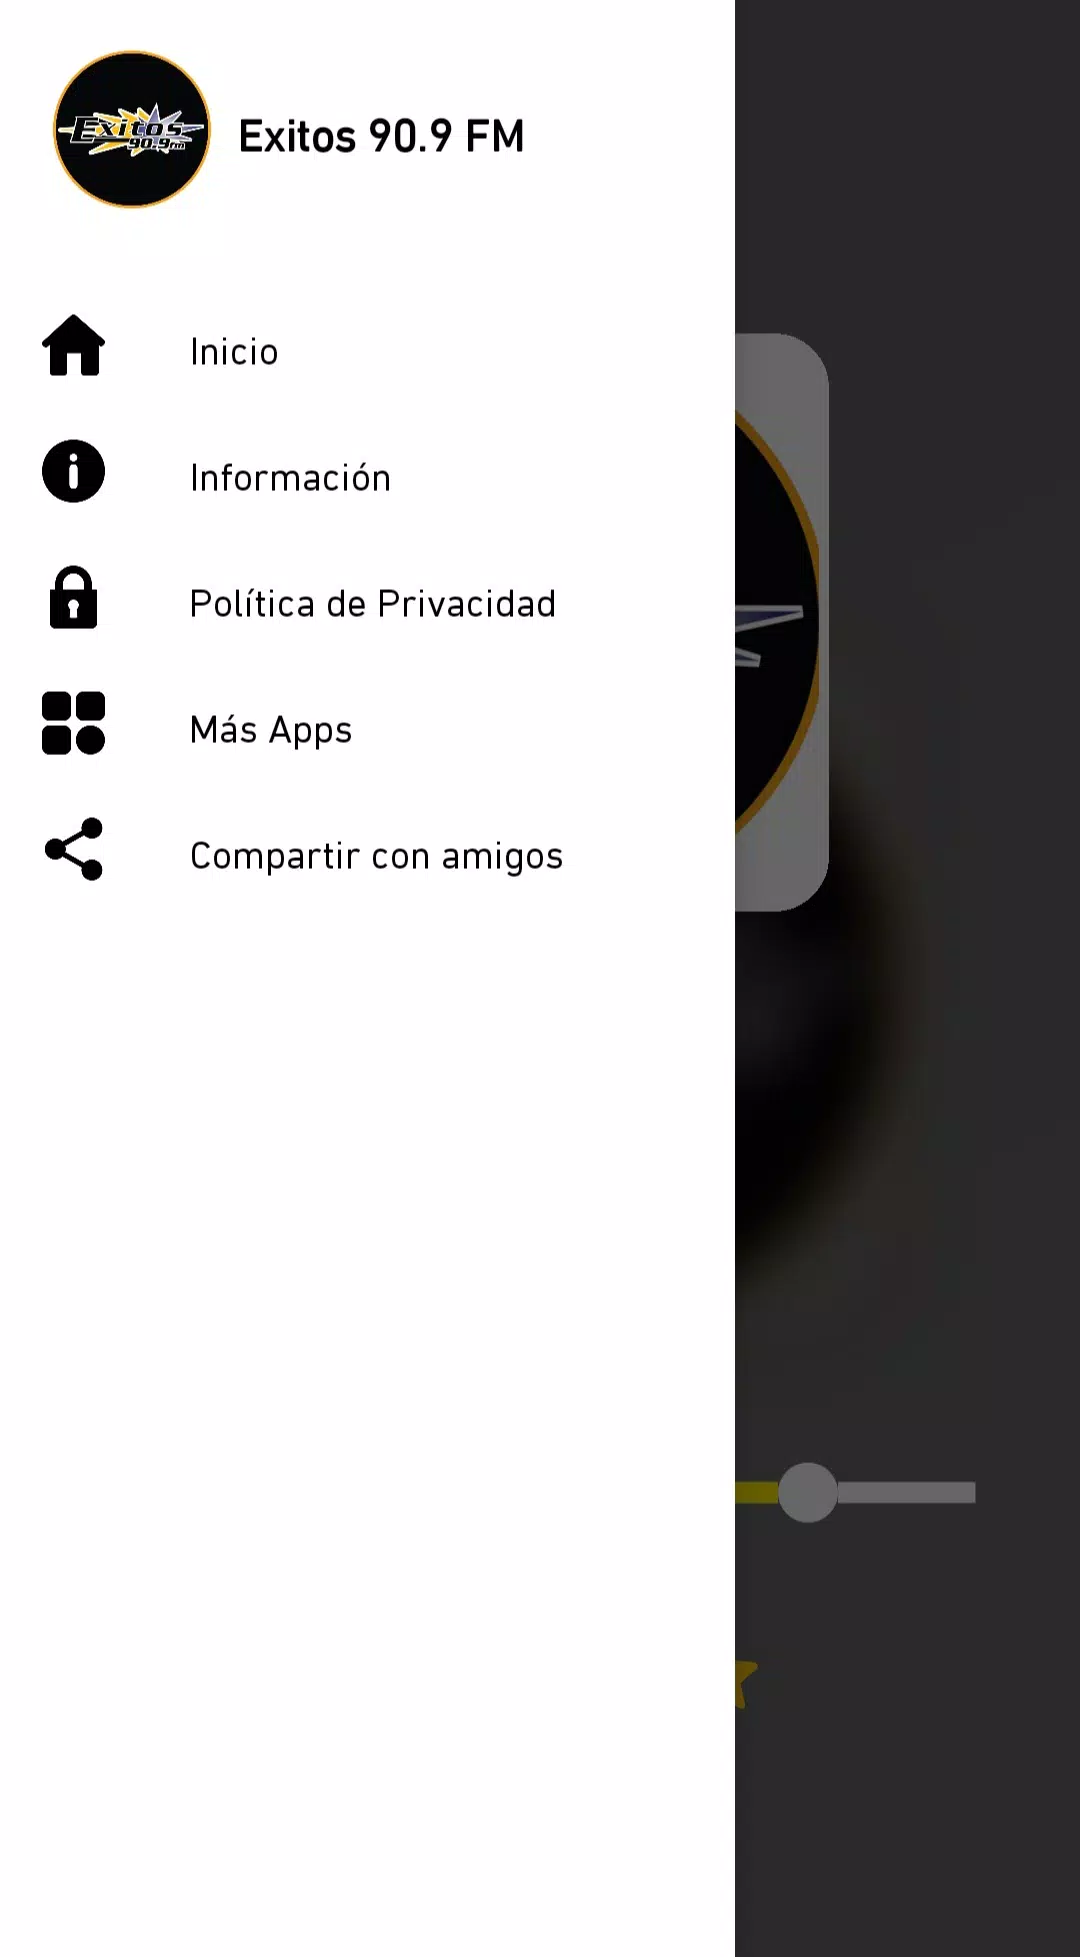 Exitos 90.9 FM for Android - APK Download